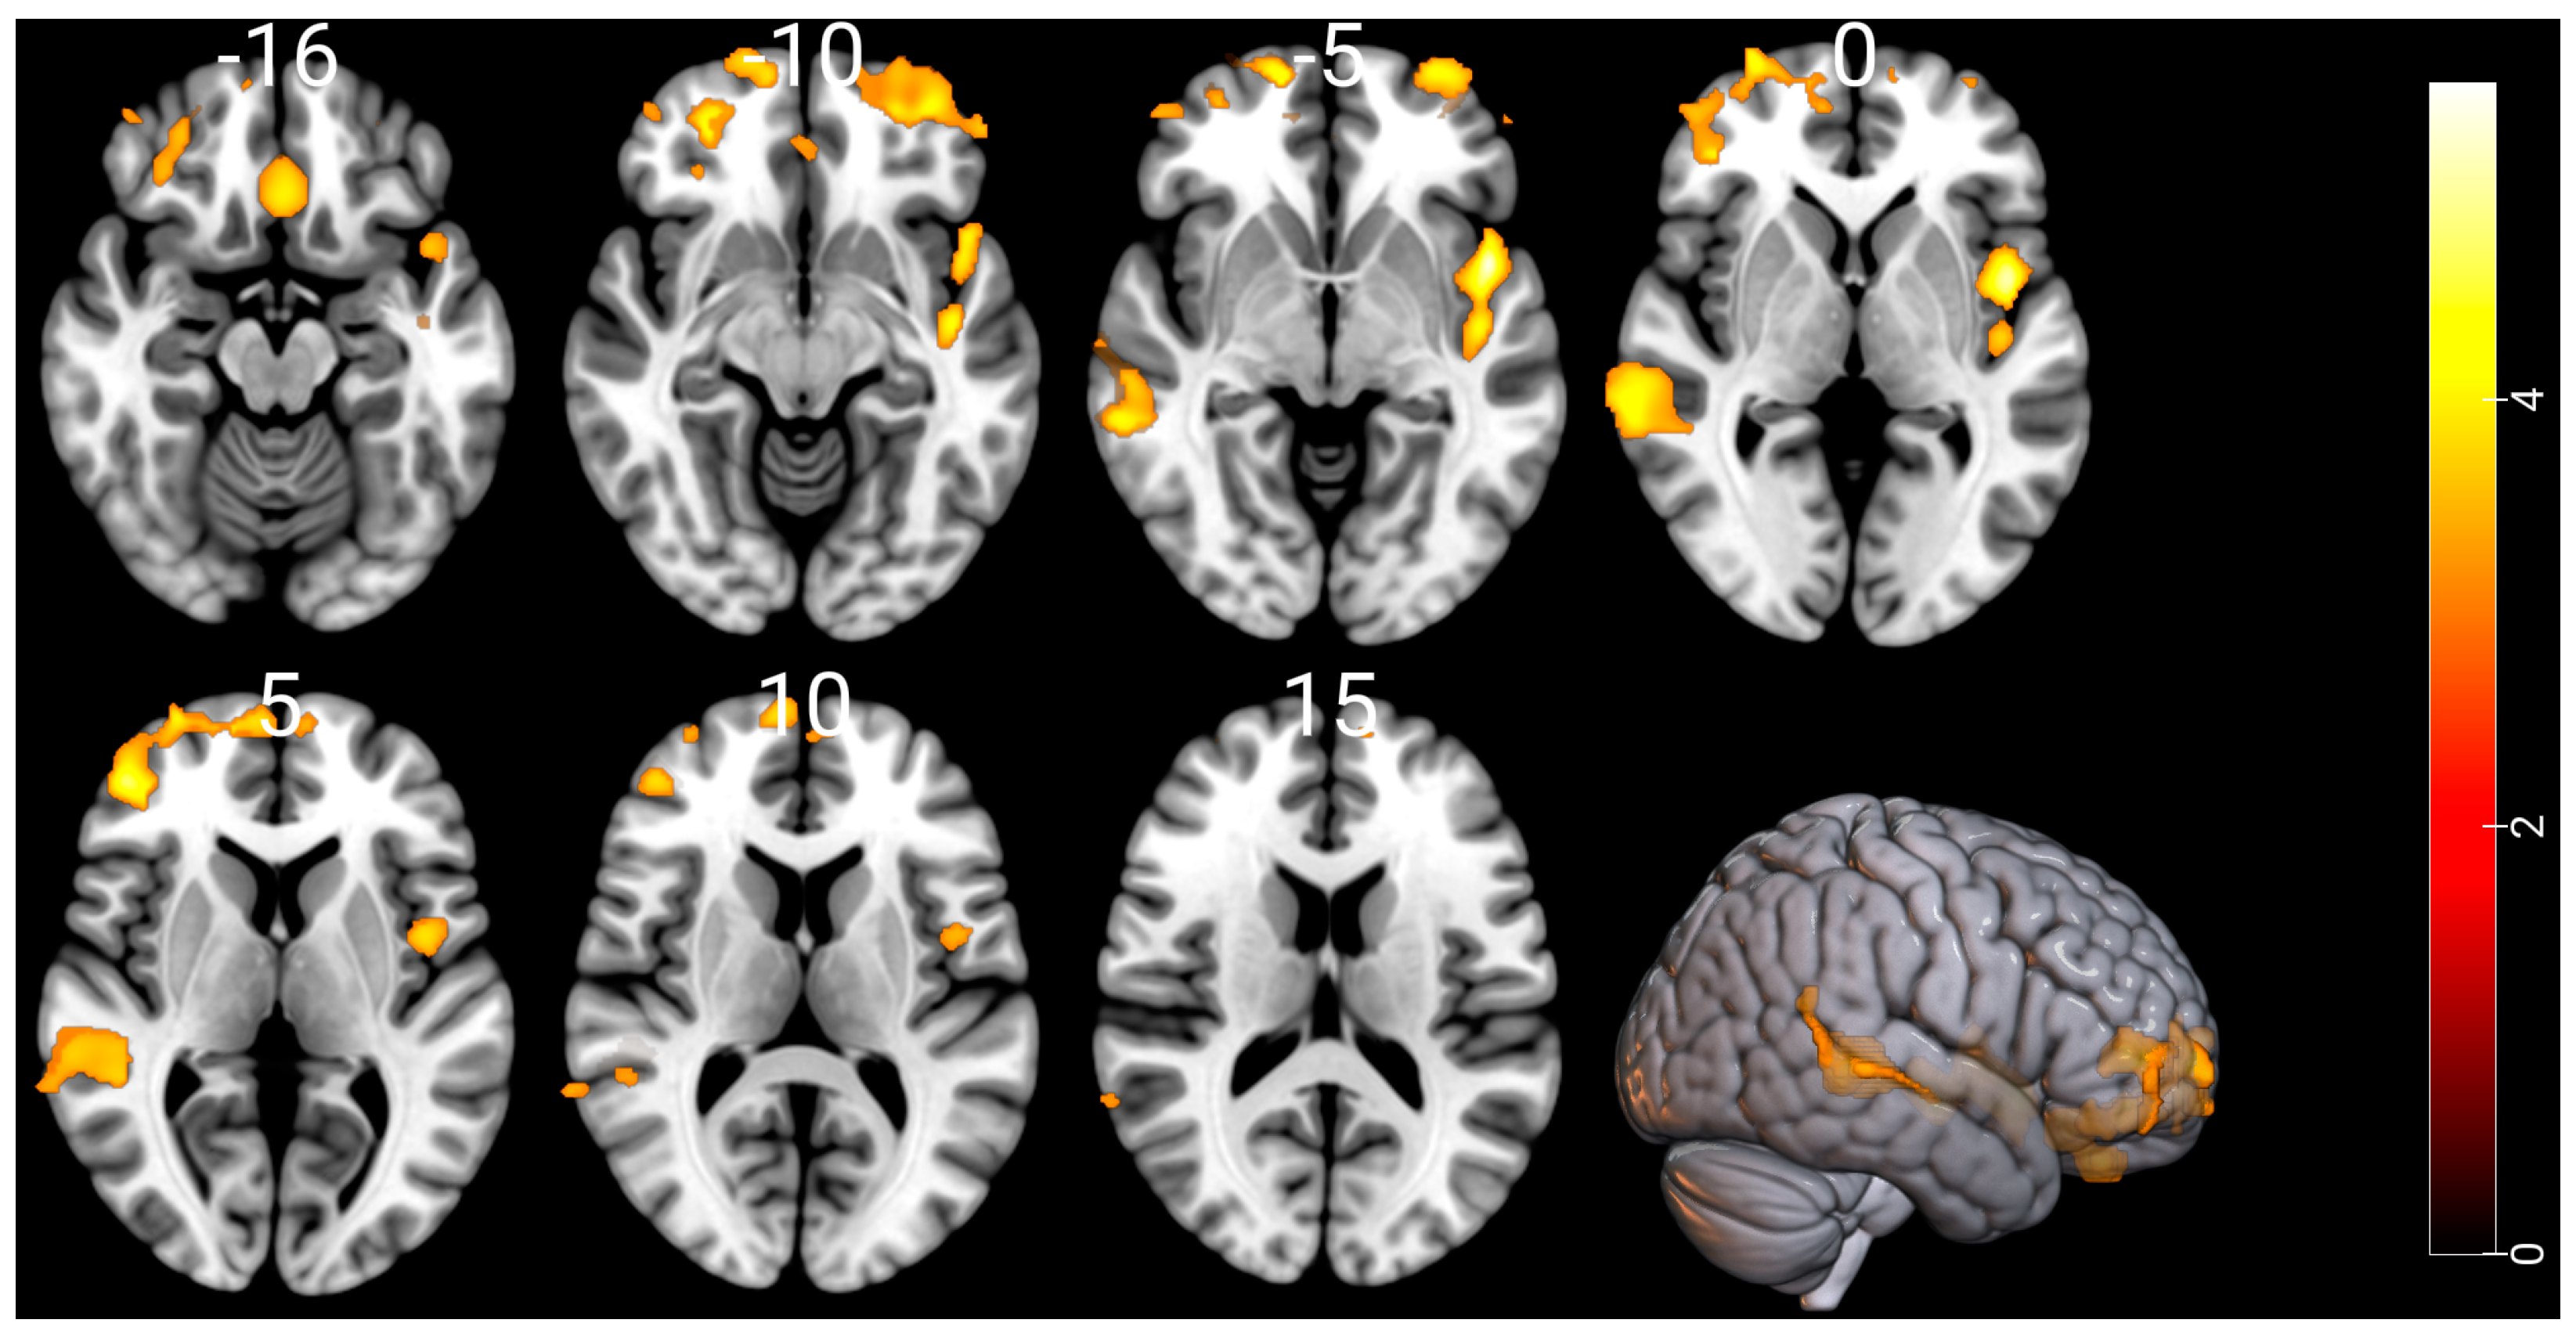 Brain aging in major depressive disorder: results from the ENIGMA